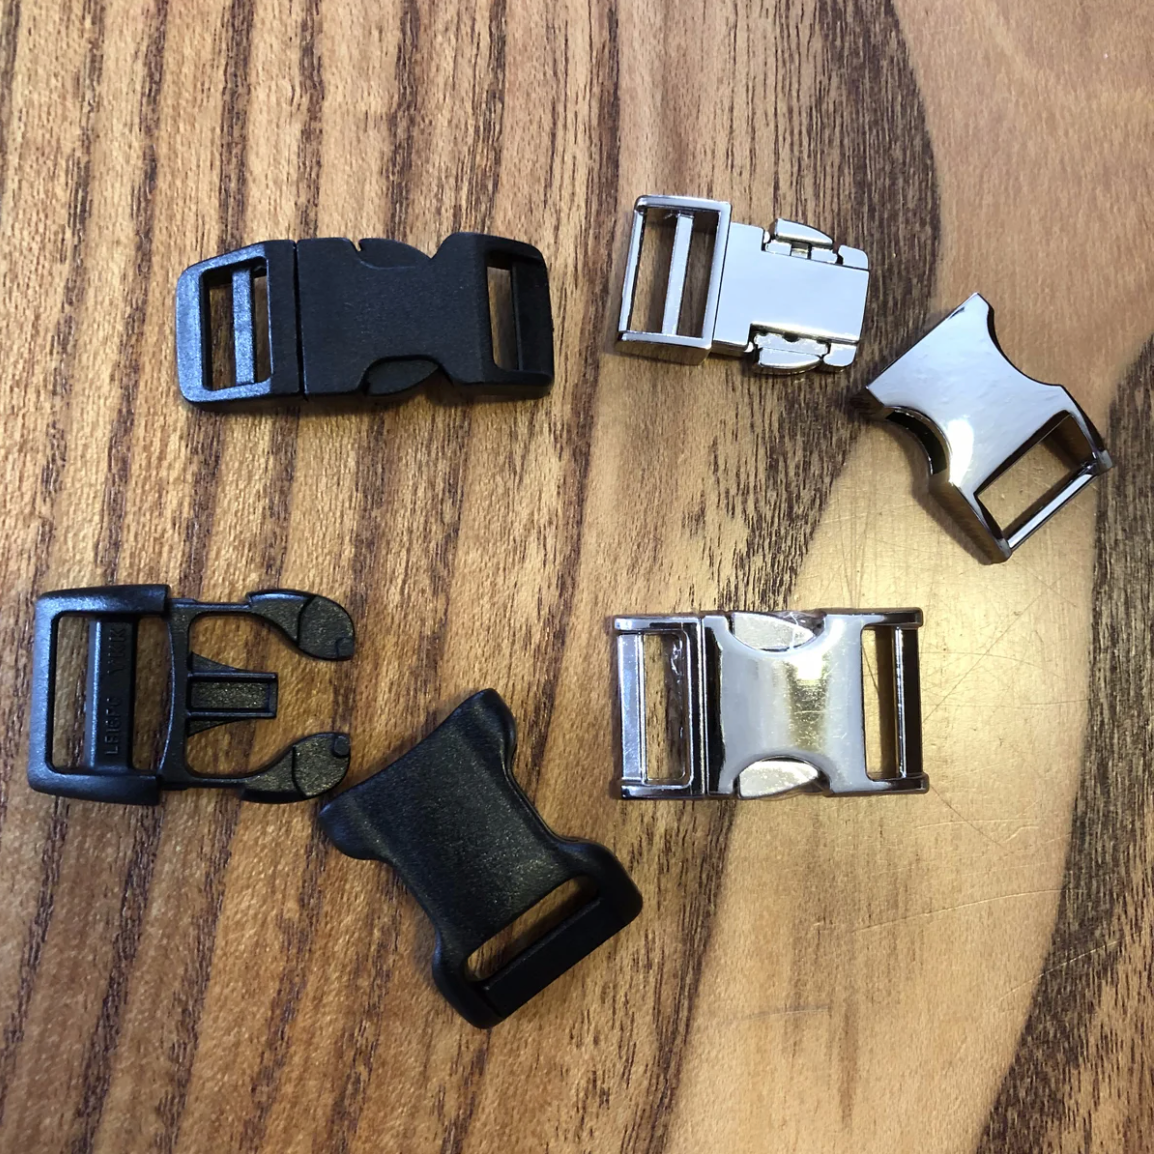 Replacement Quick-Release Buckle – Trust Your Dog